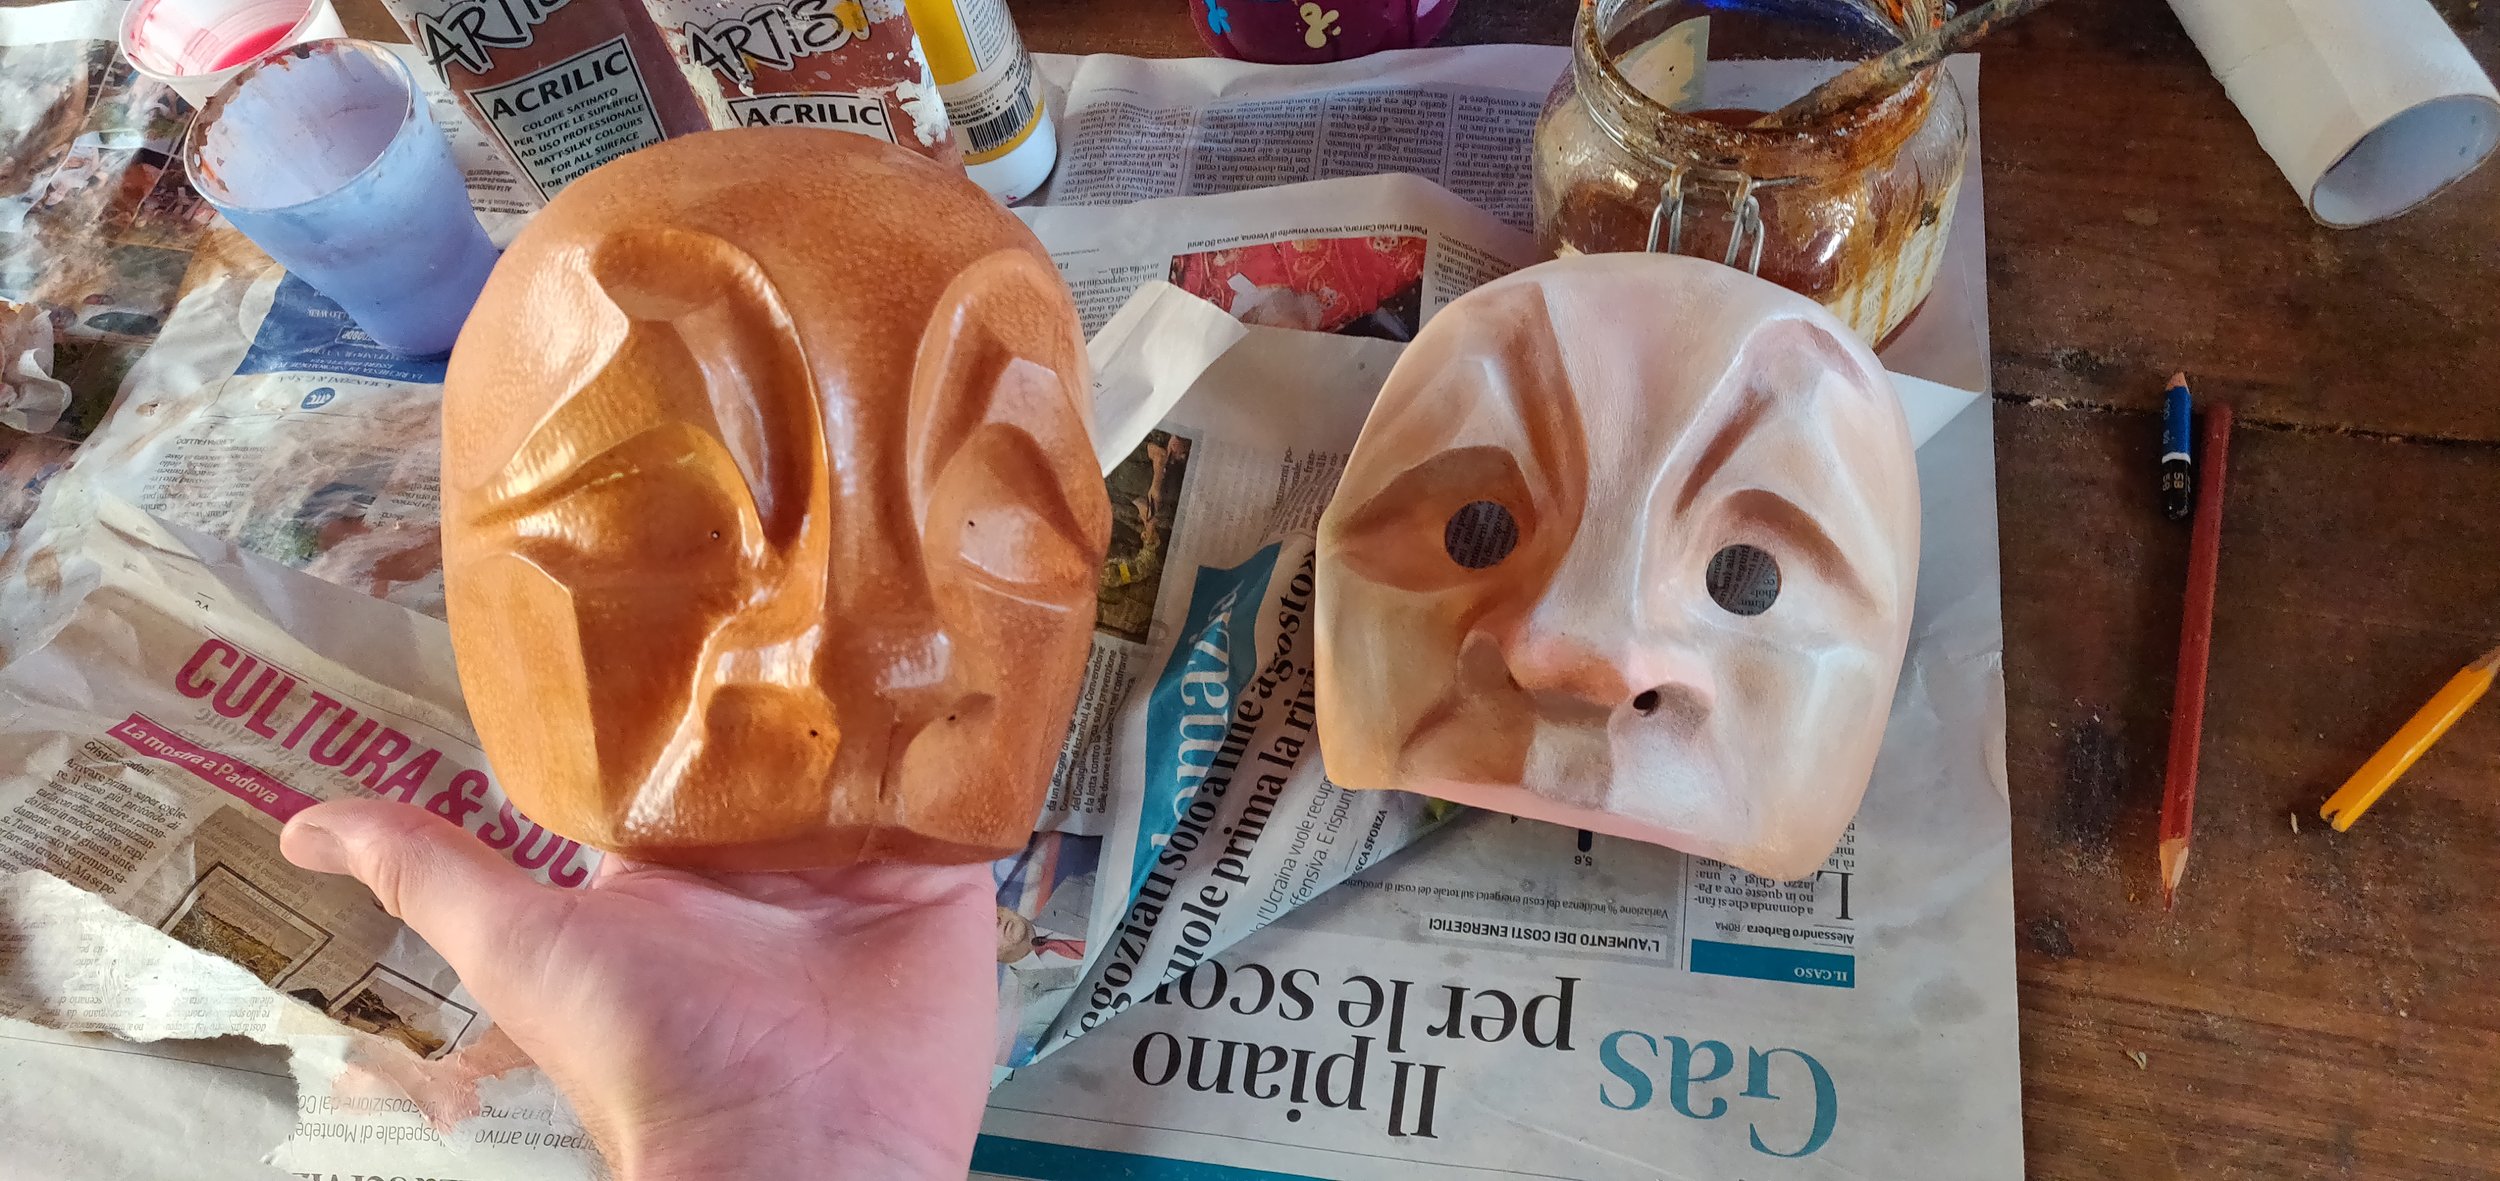 Leather mask in progress with painted papier mache